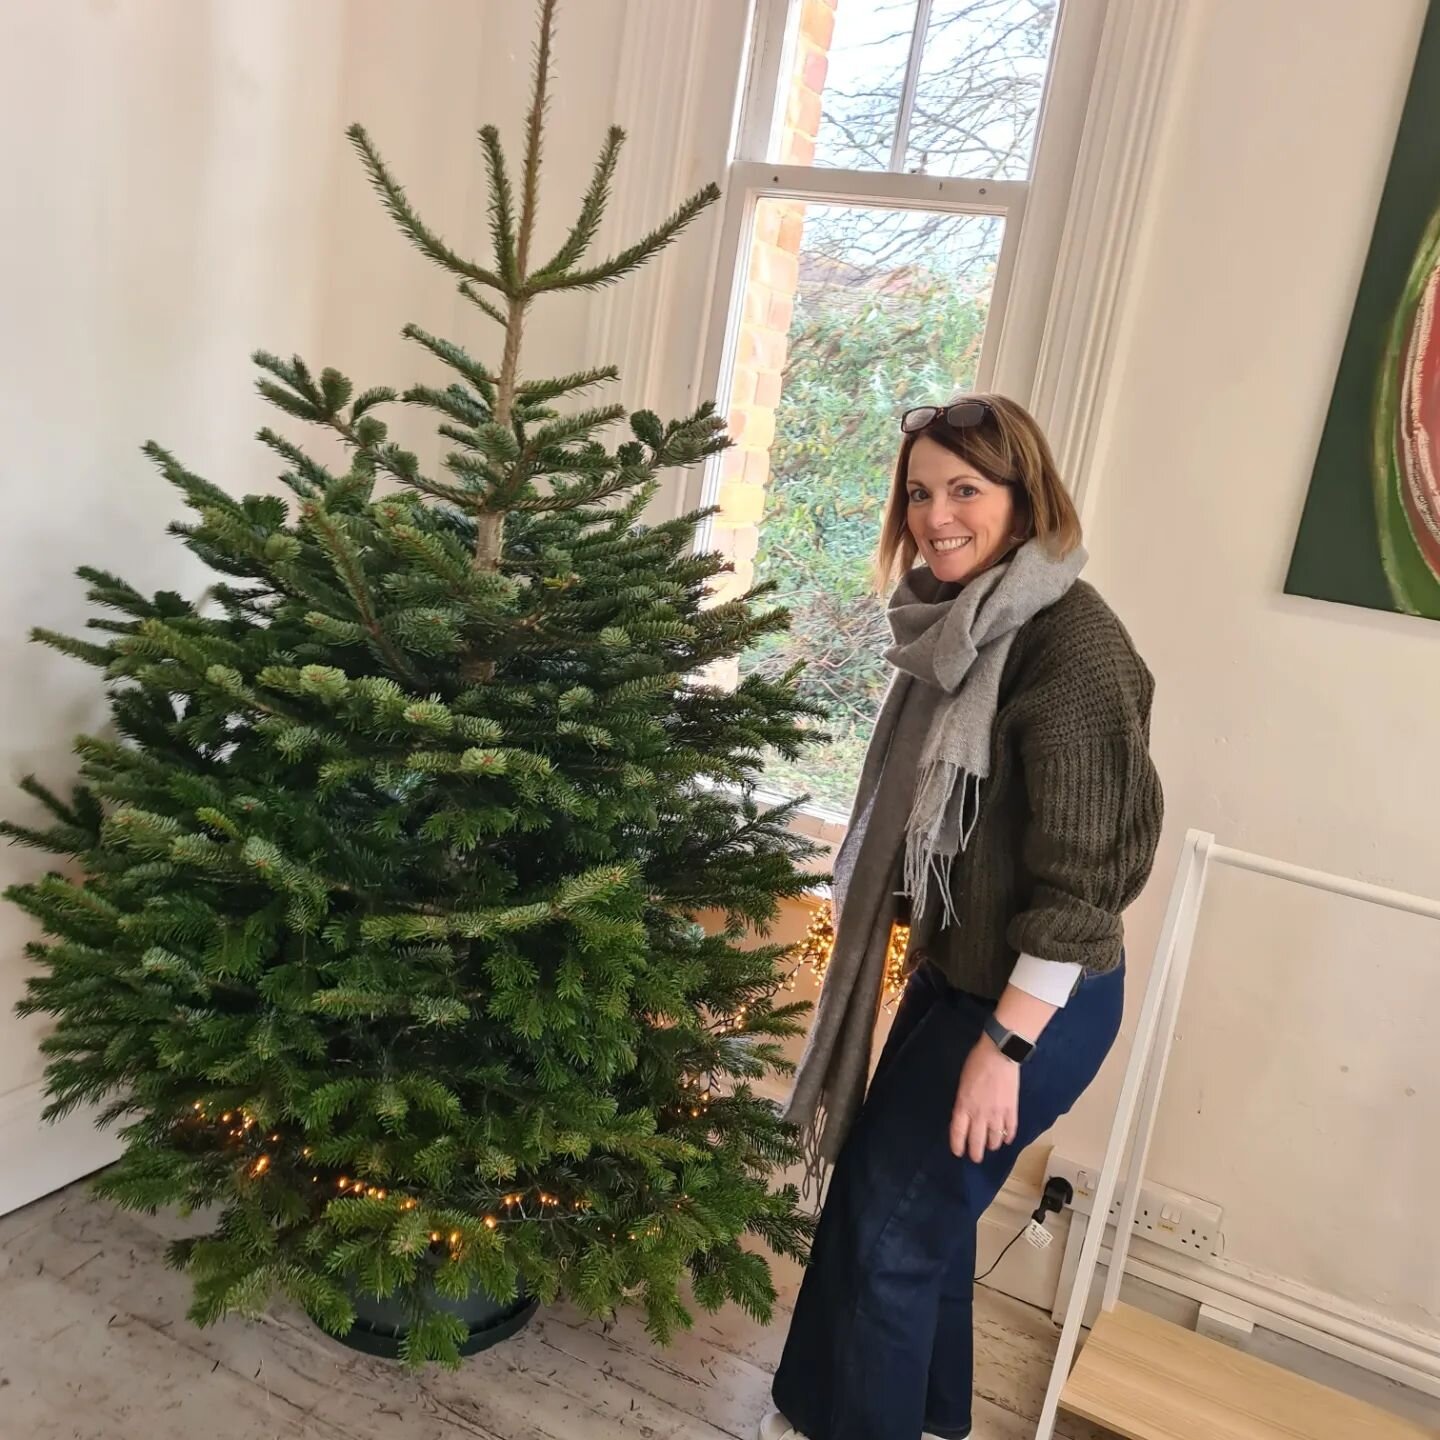 Day 2 of setting up the gallery, ready for Fridays opening! Beautiful tree selected and delivered by @pickford358 and unpacking, hanging and caffeine support by @light_inthe_forest @amypaintsthings @raphandrosehandmade and @hooplagems. 🫖

#itsbeginn